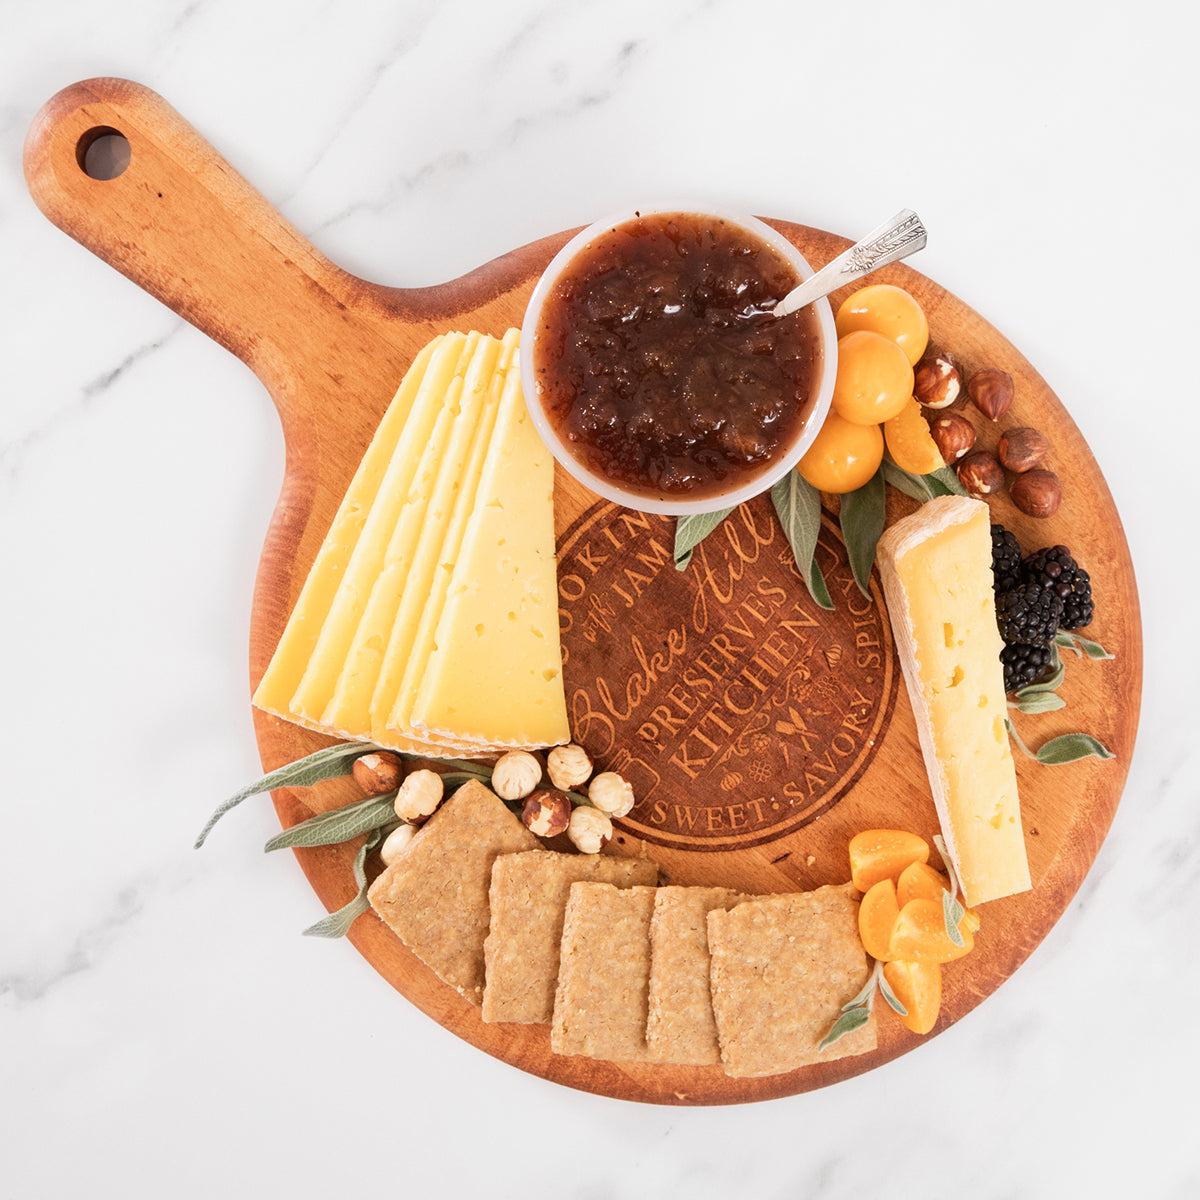 How to Make A Cheese Board Recipe - Love and Lemons